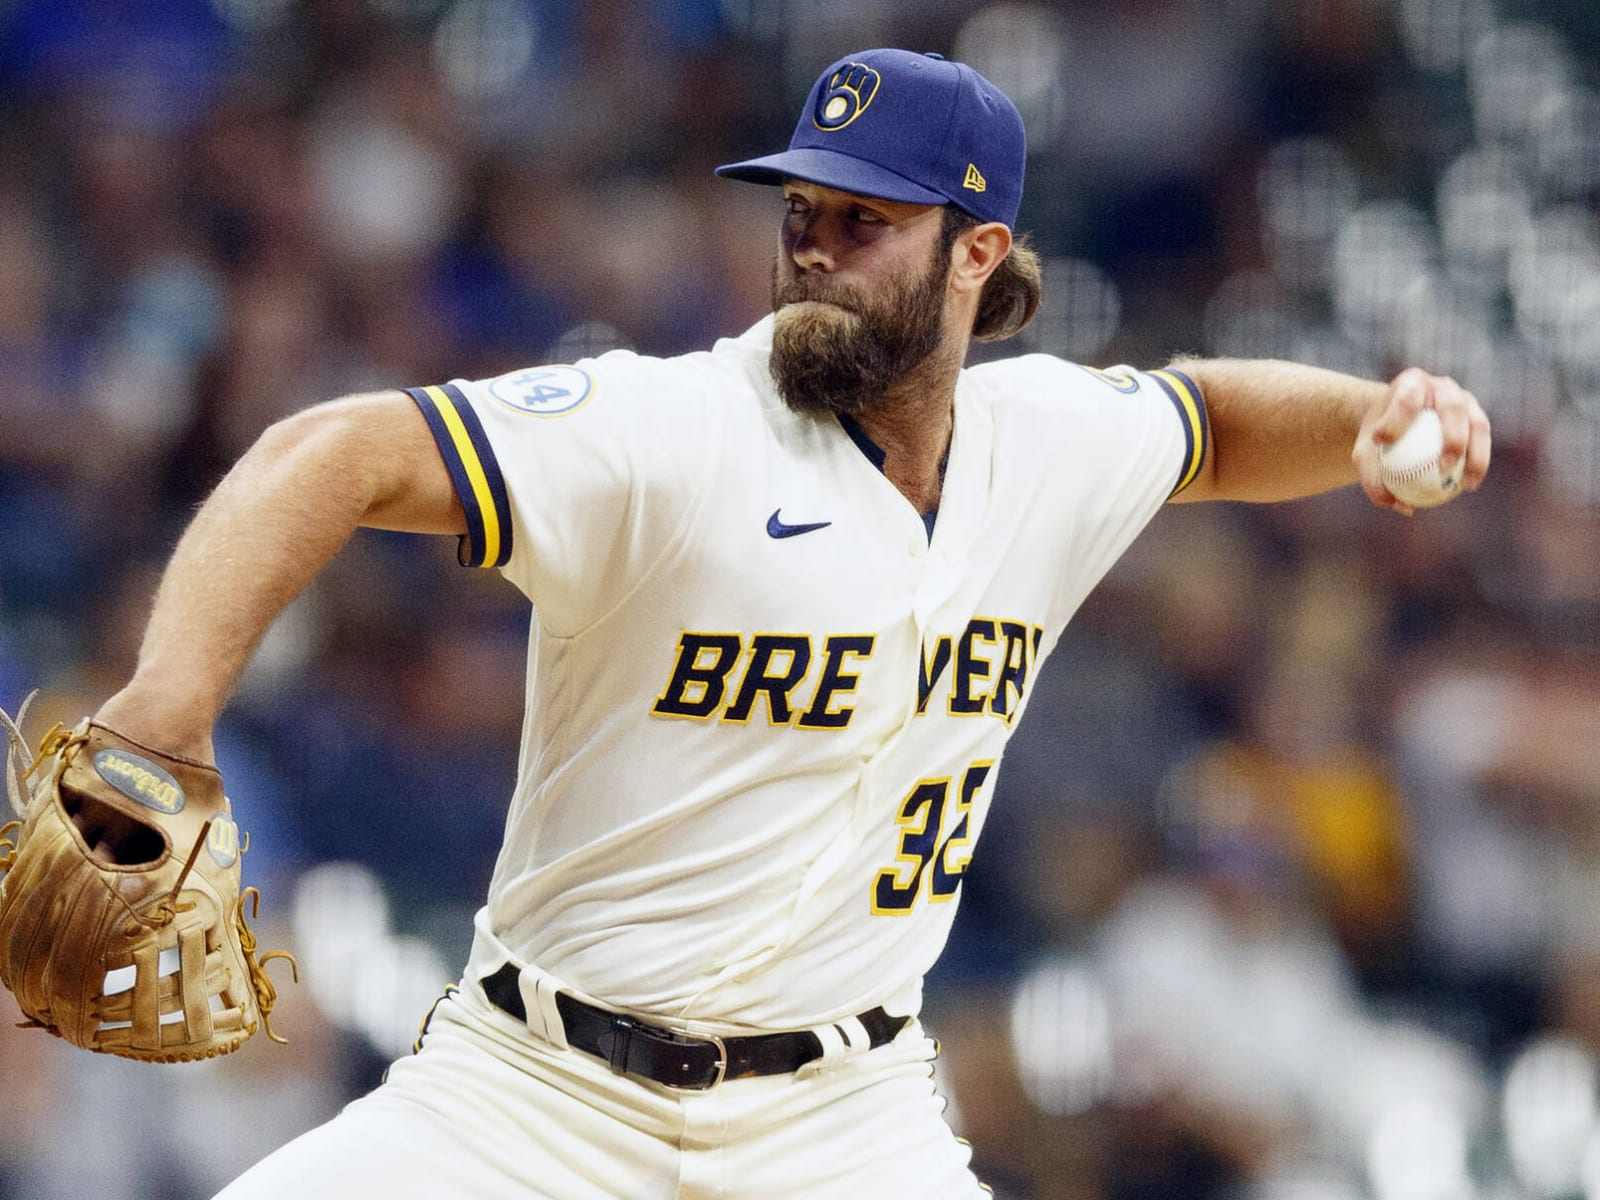 BREAKING: The Milwaukee Brewers have acquired LHP Daniel Norris